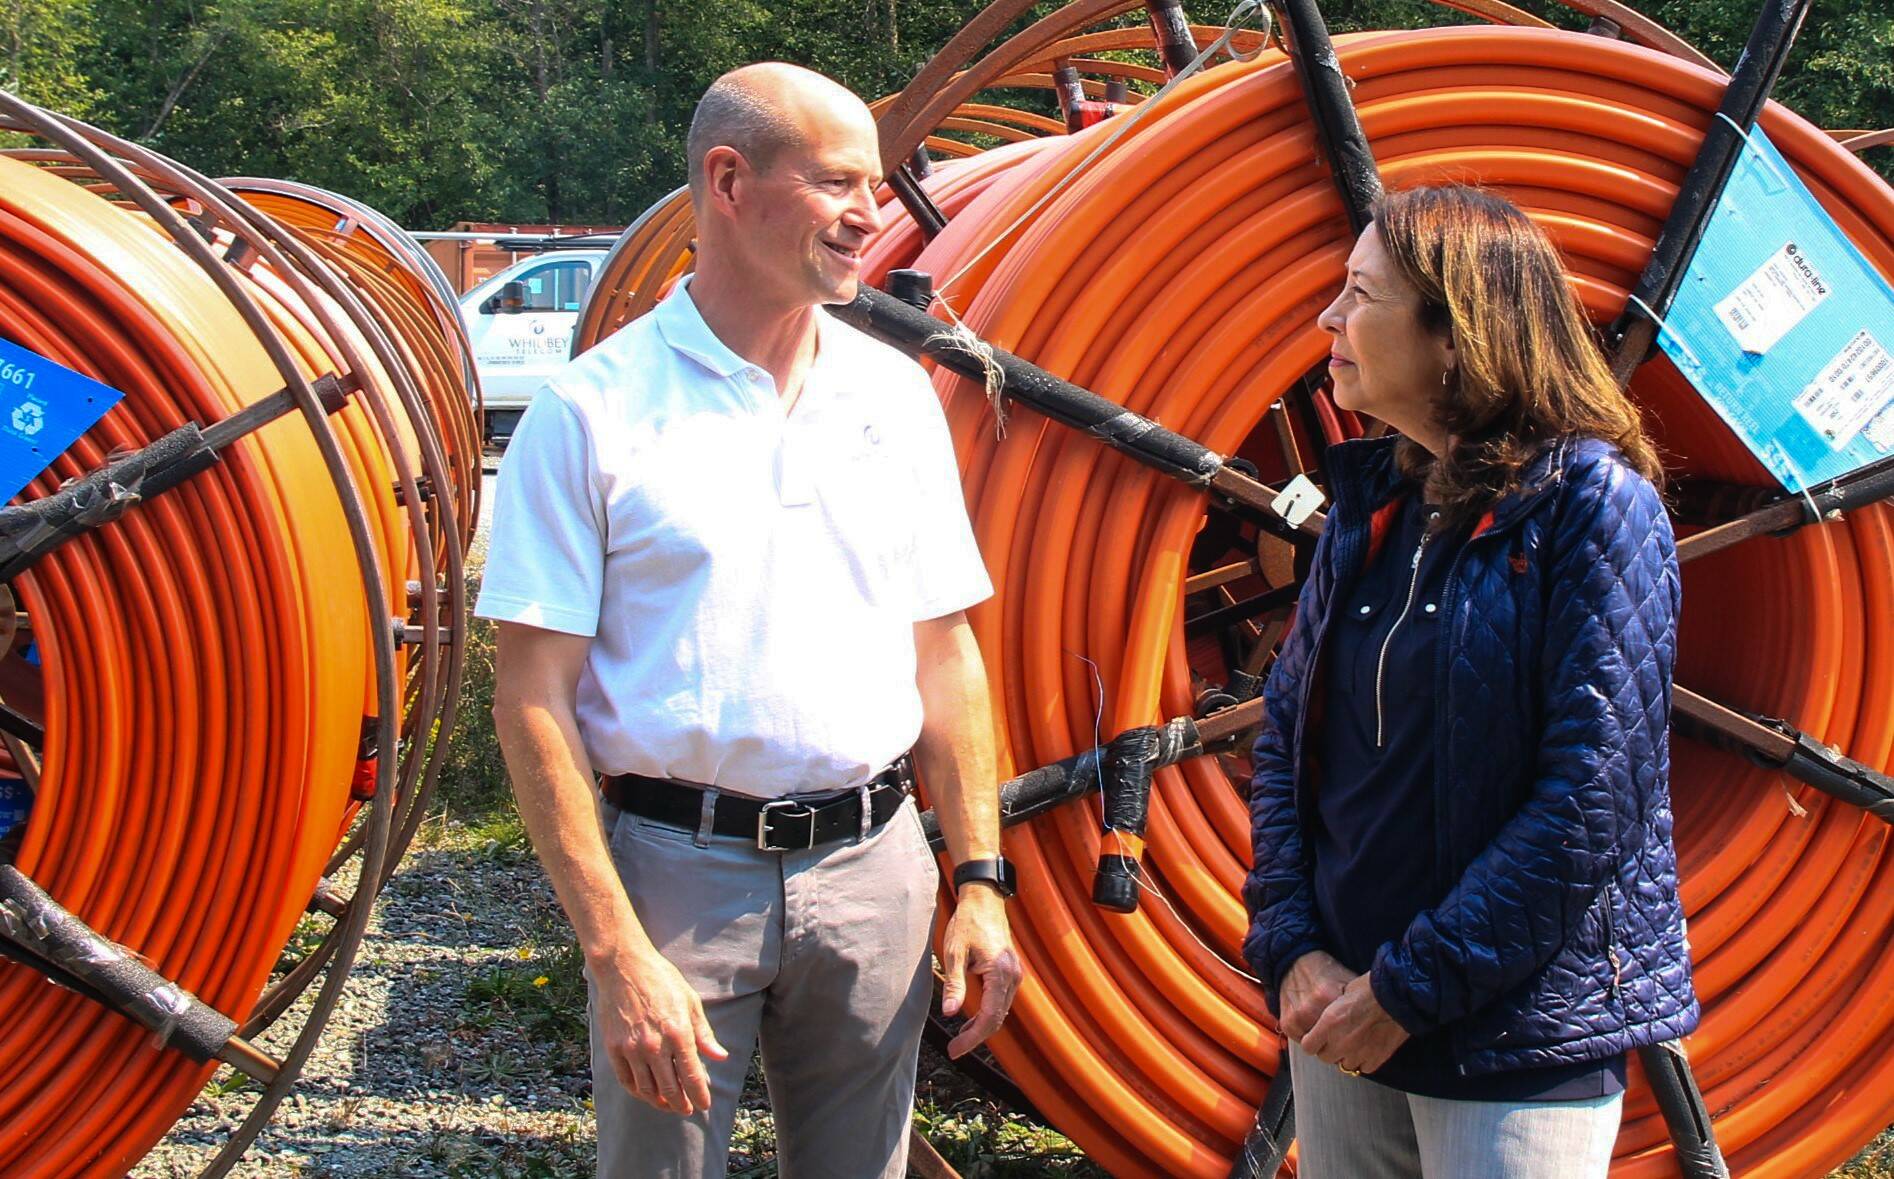 Cantwell speaks with Whidbey Telecom Co-CEO George Henny. (Photo by Luisa Loi/Whidbey News-Times)